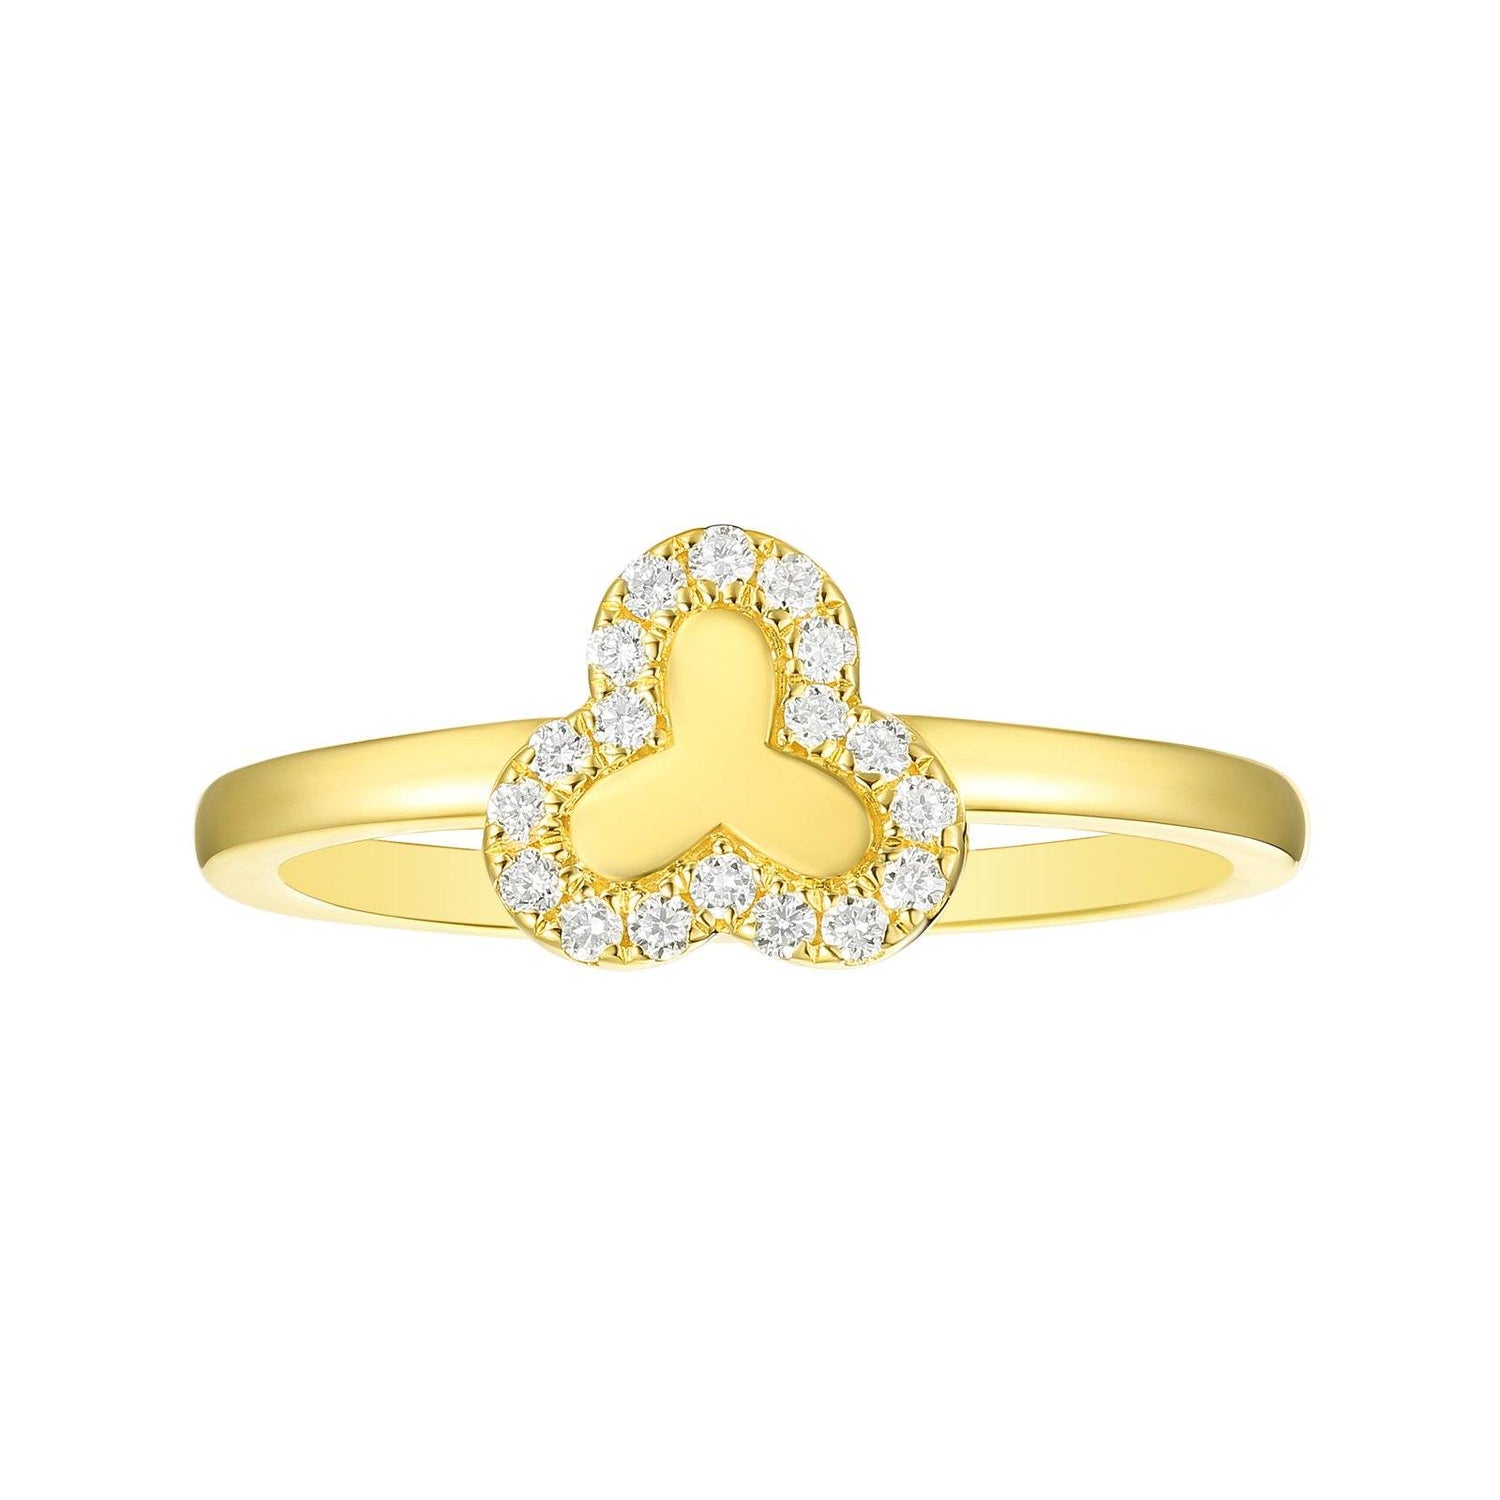 Love Collection Lab Grown Diamonds Ring Ring Analucia Beltran Diamonds 14 kt yellow gold plated